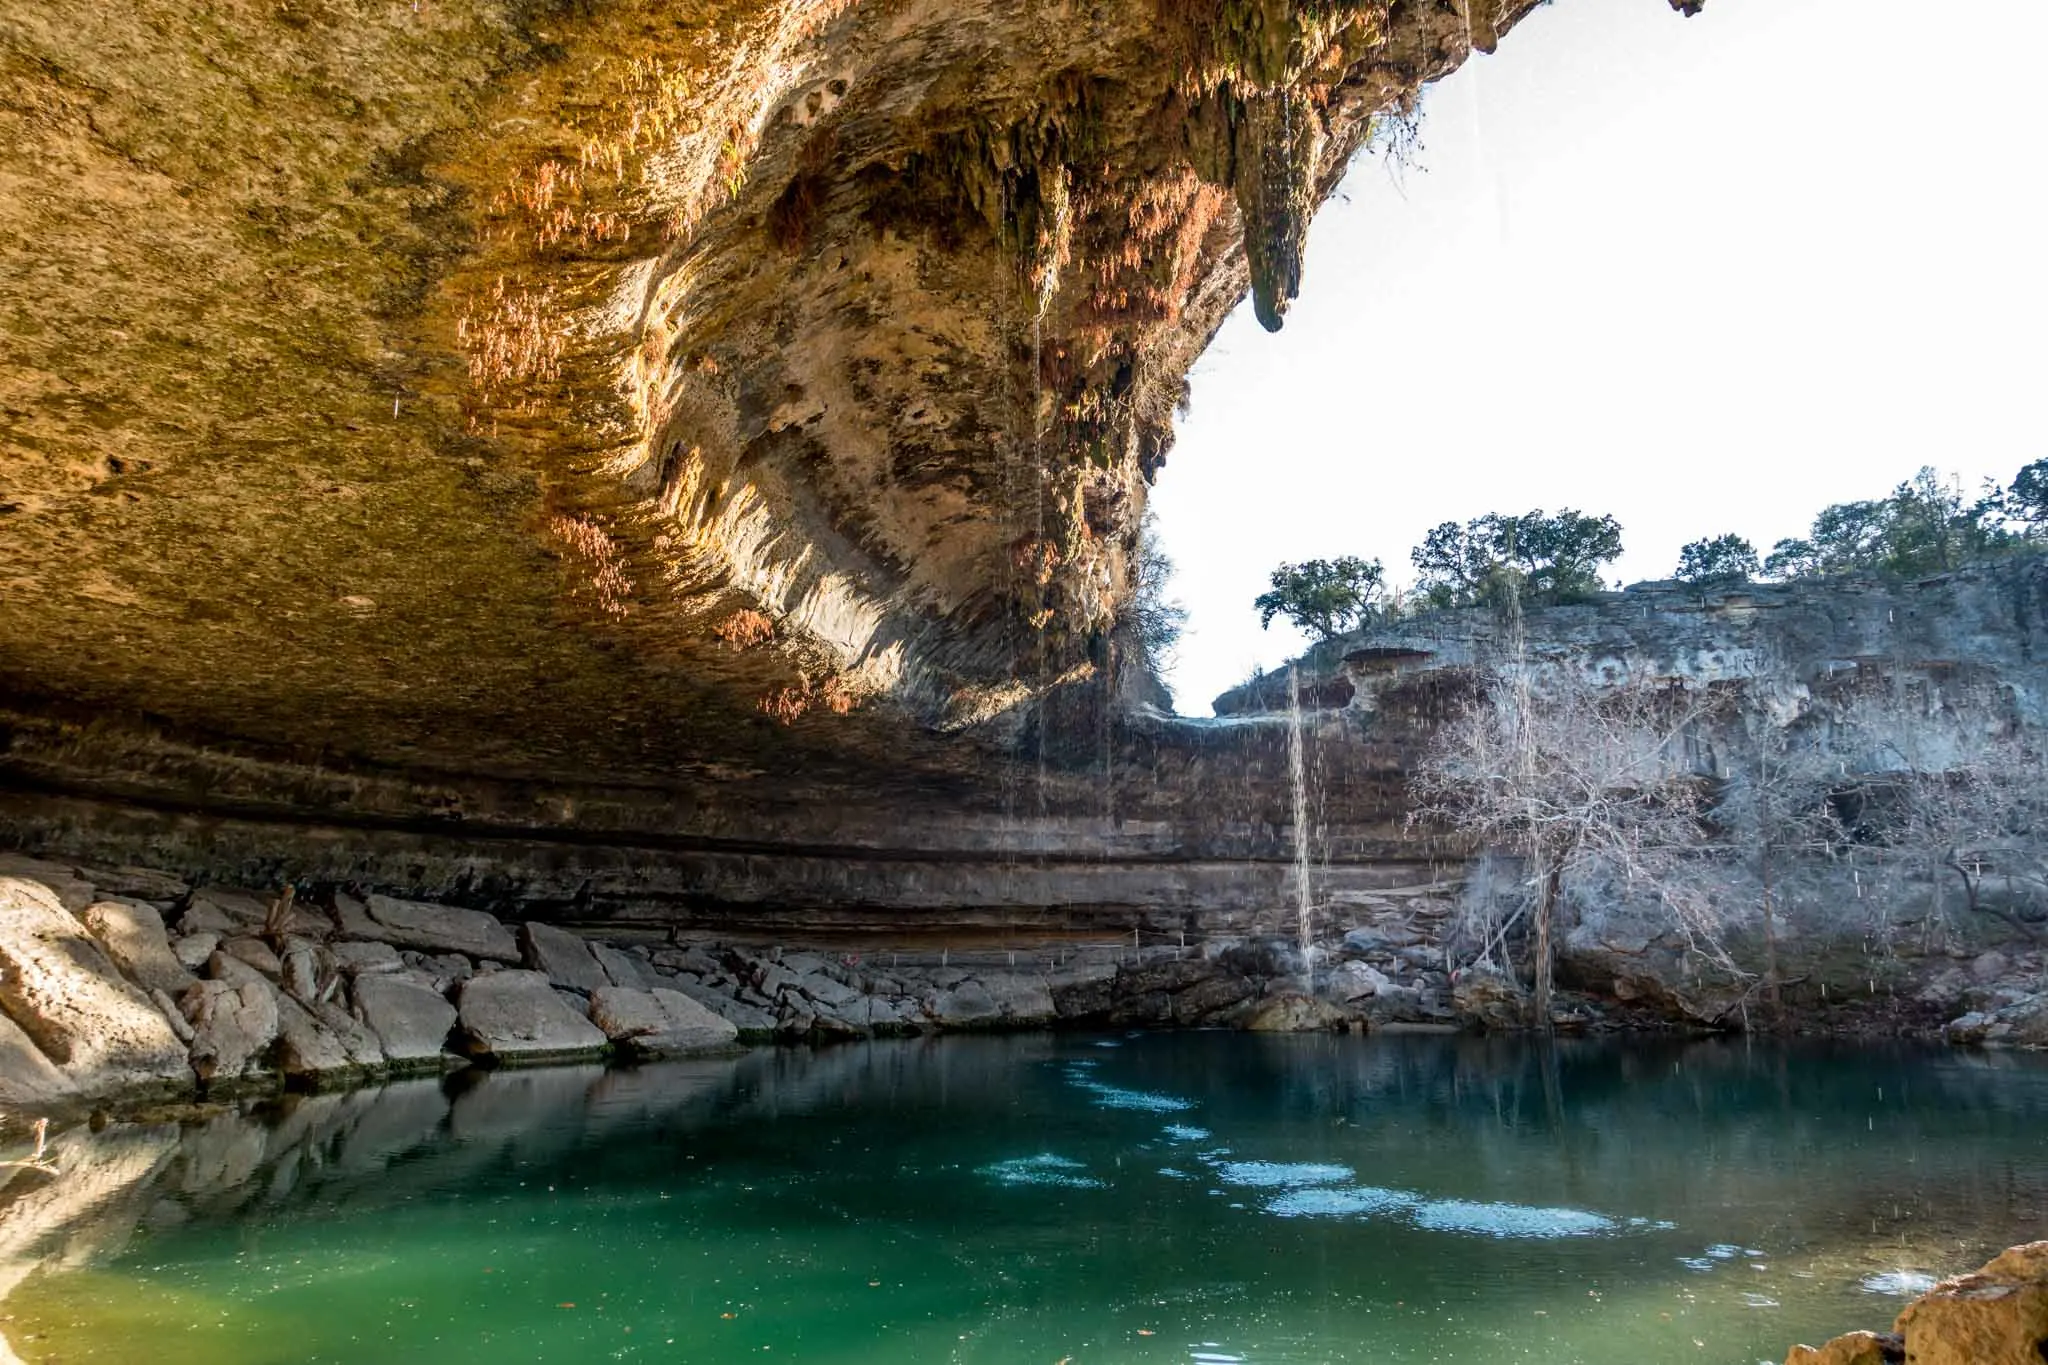 Water dripping into a large natural pool.